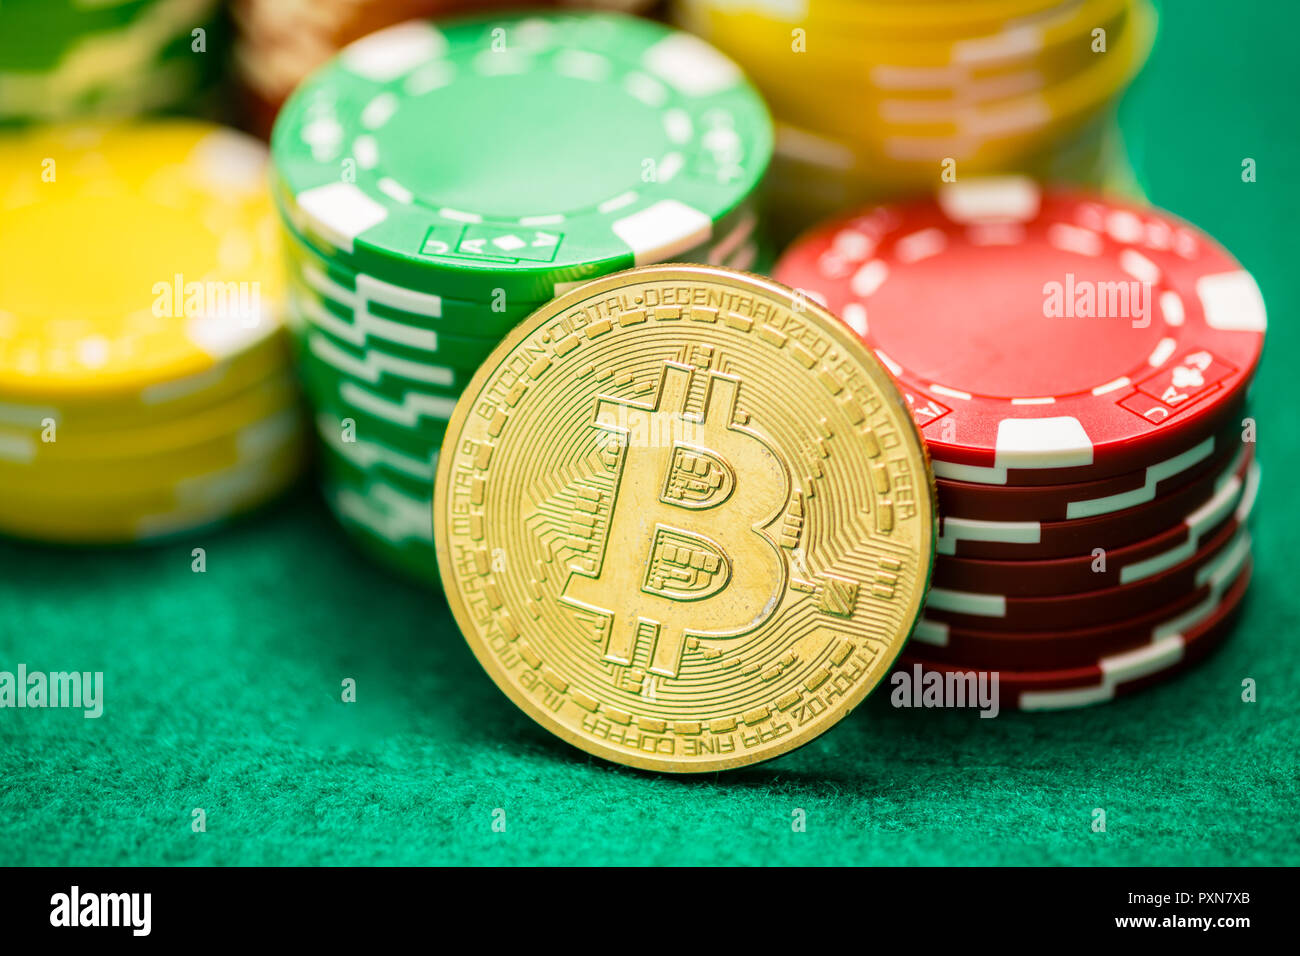 How To Find The Right gambling bitcoin For Your Specific Service